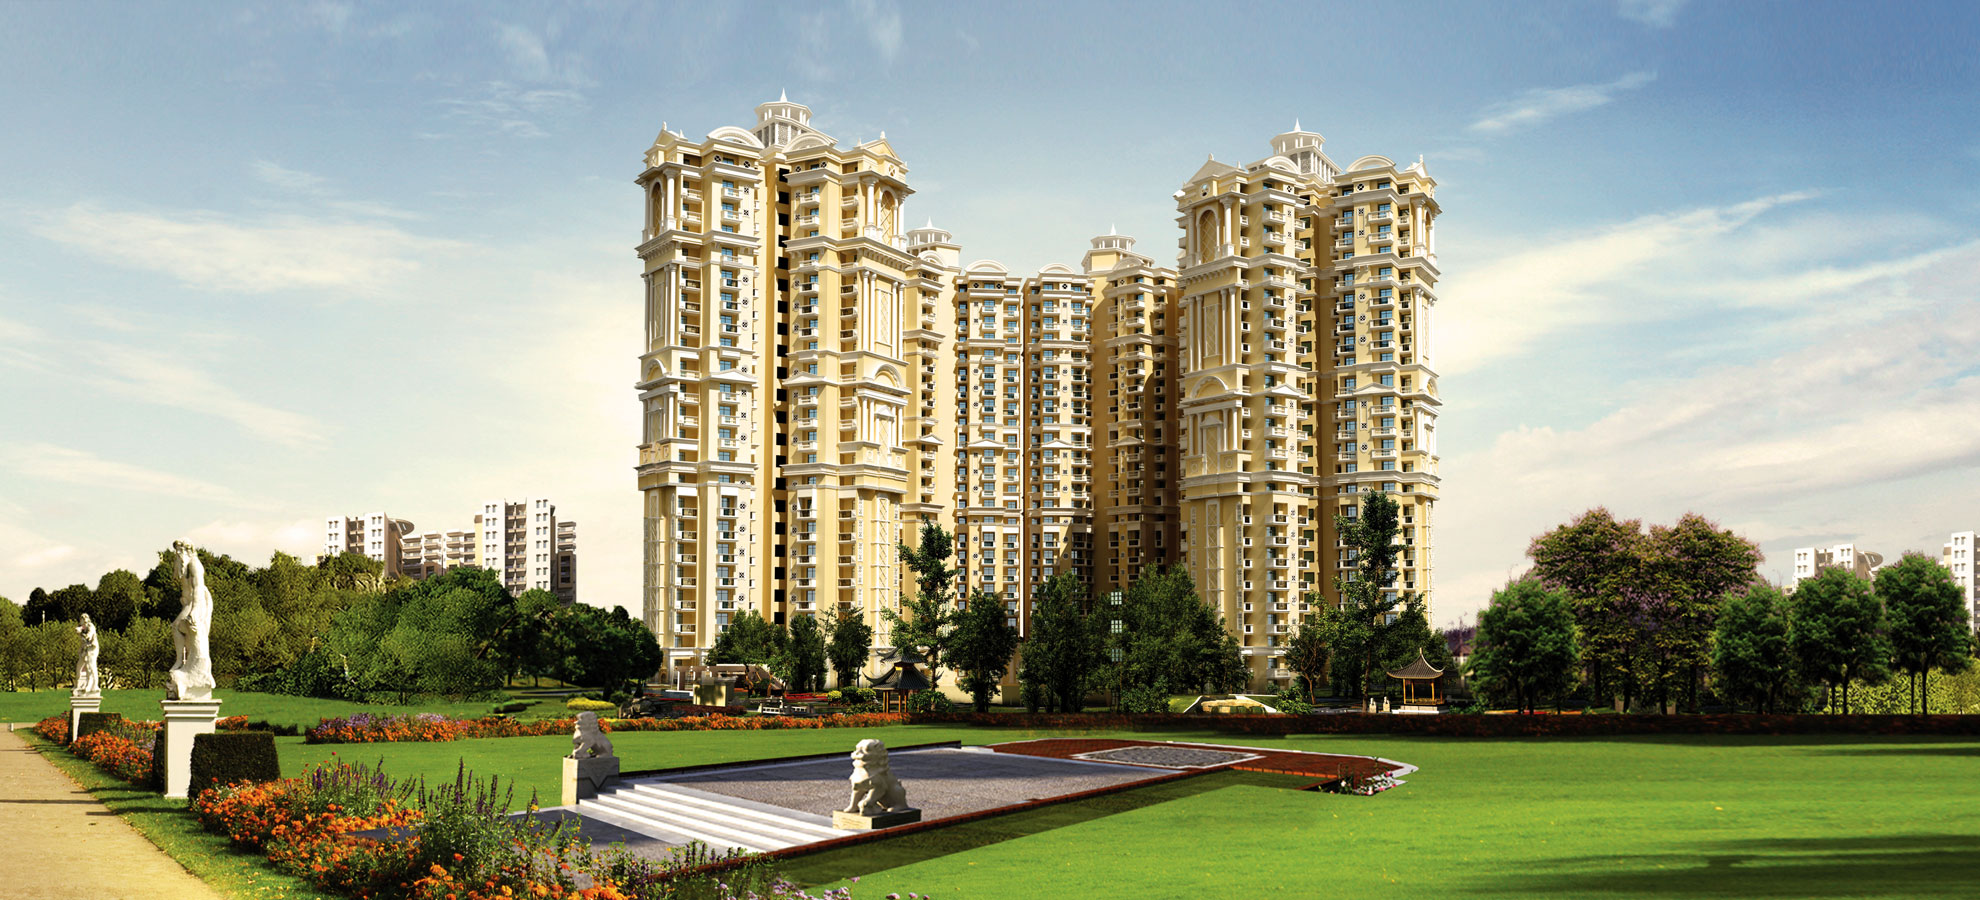 Supertech The Romano has been designed on classical Roman Architecture ensuring all world class advanced amenities